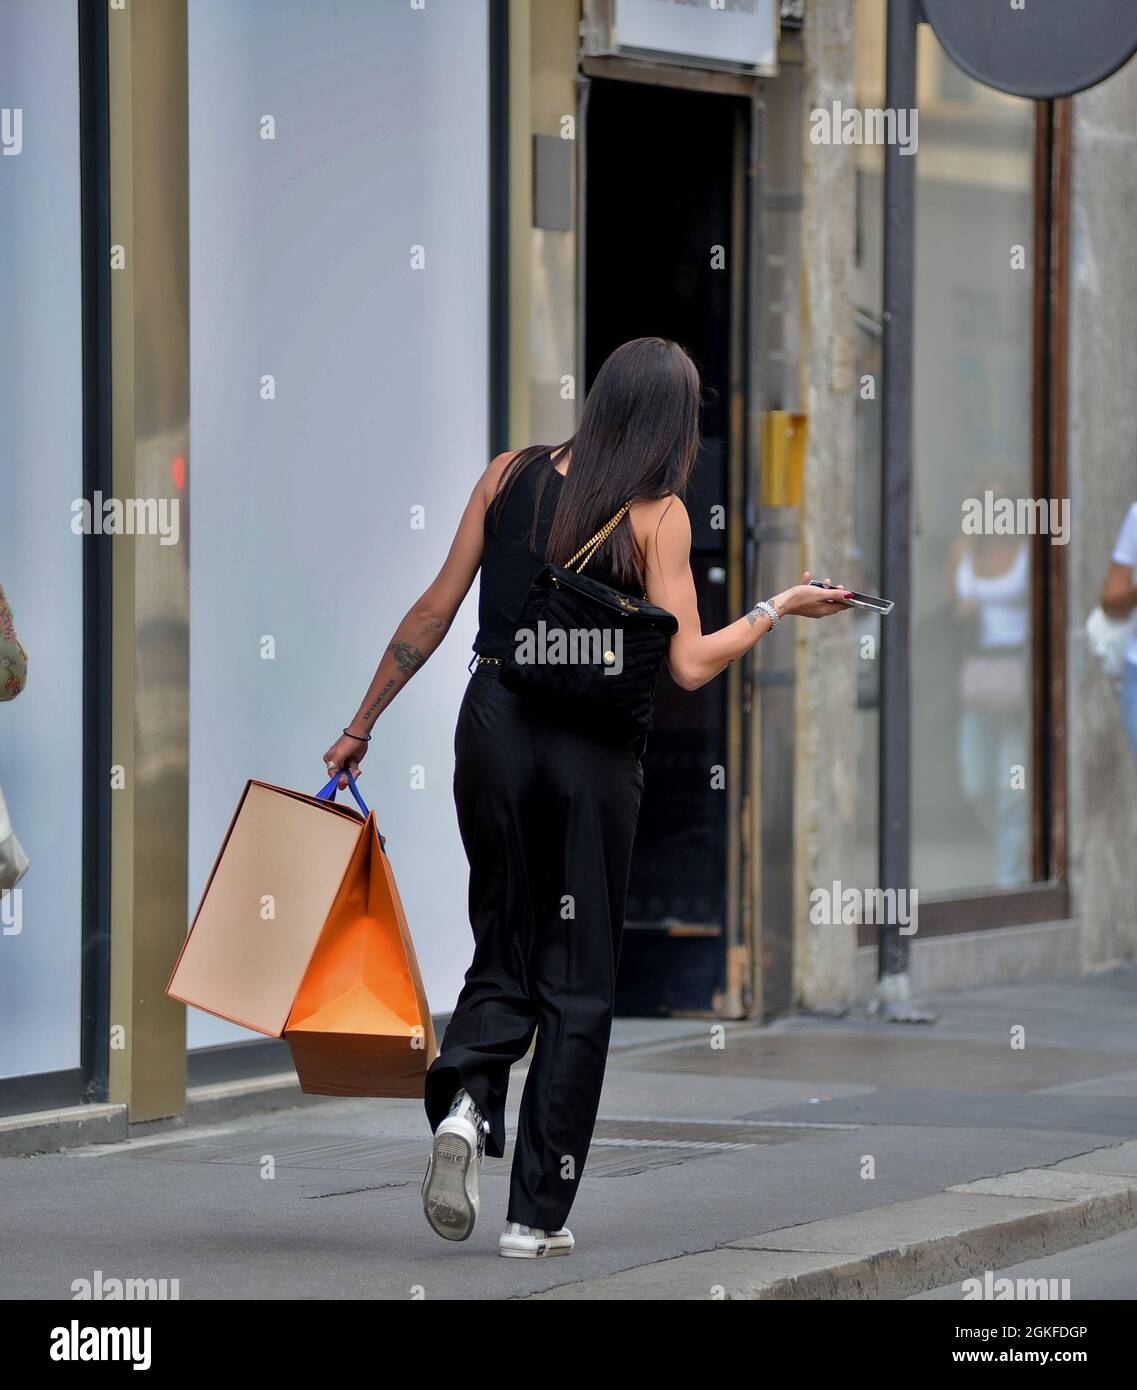 Milan, . 14th Sep, 2021. Milan, 14-9-2021 Carolina Stramare ex Miss Italy  after shopping at Louis Vuitton stops at the Marchesi bar for a coffee  break, then after a walk she decides